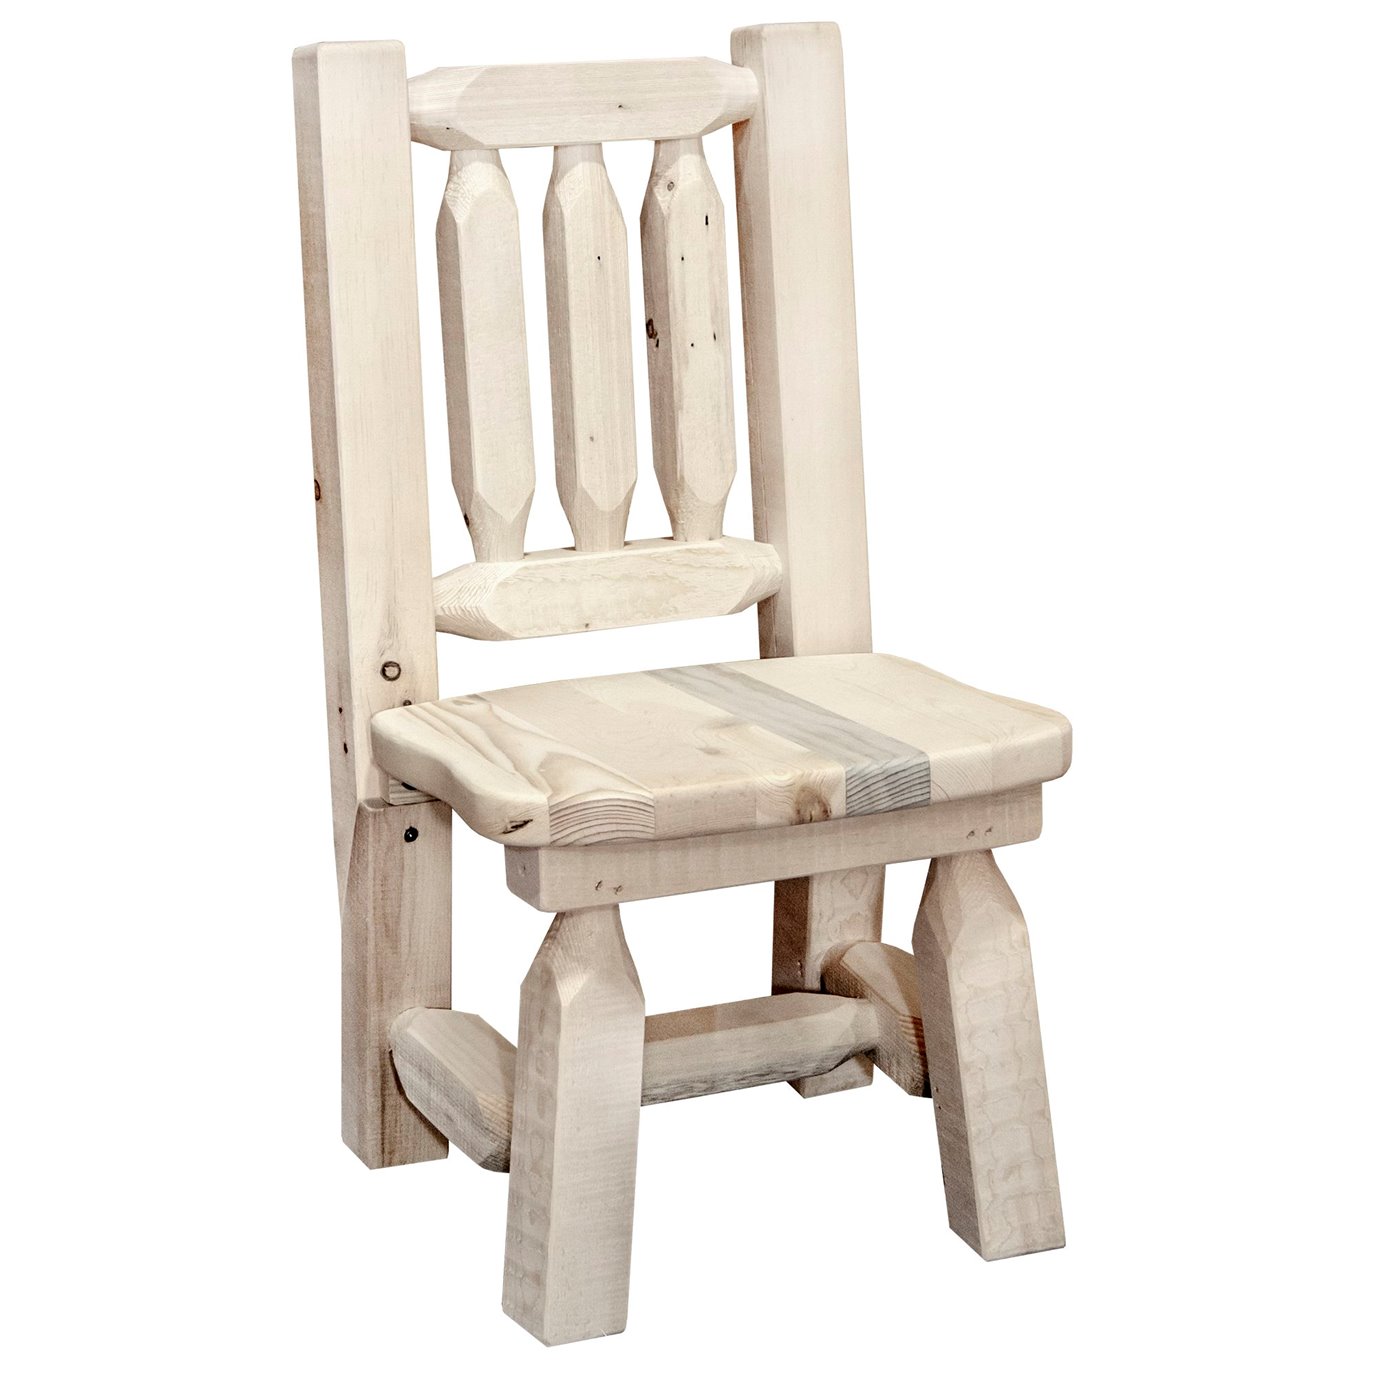 Homestead Child's Chair - Clear Lacquer Finish